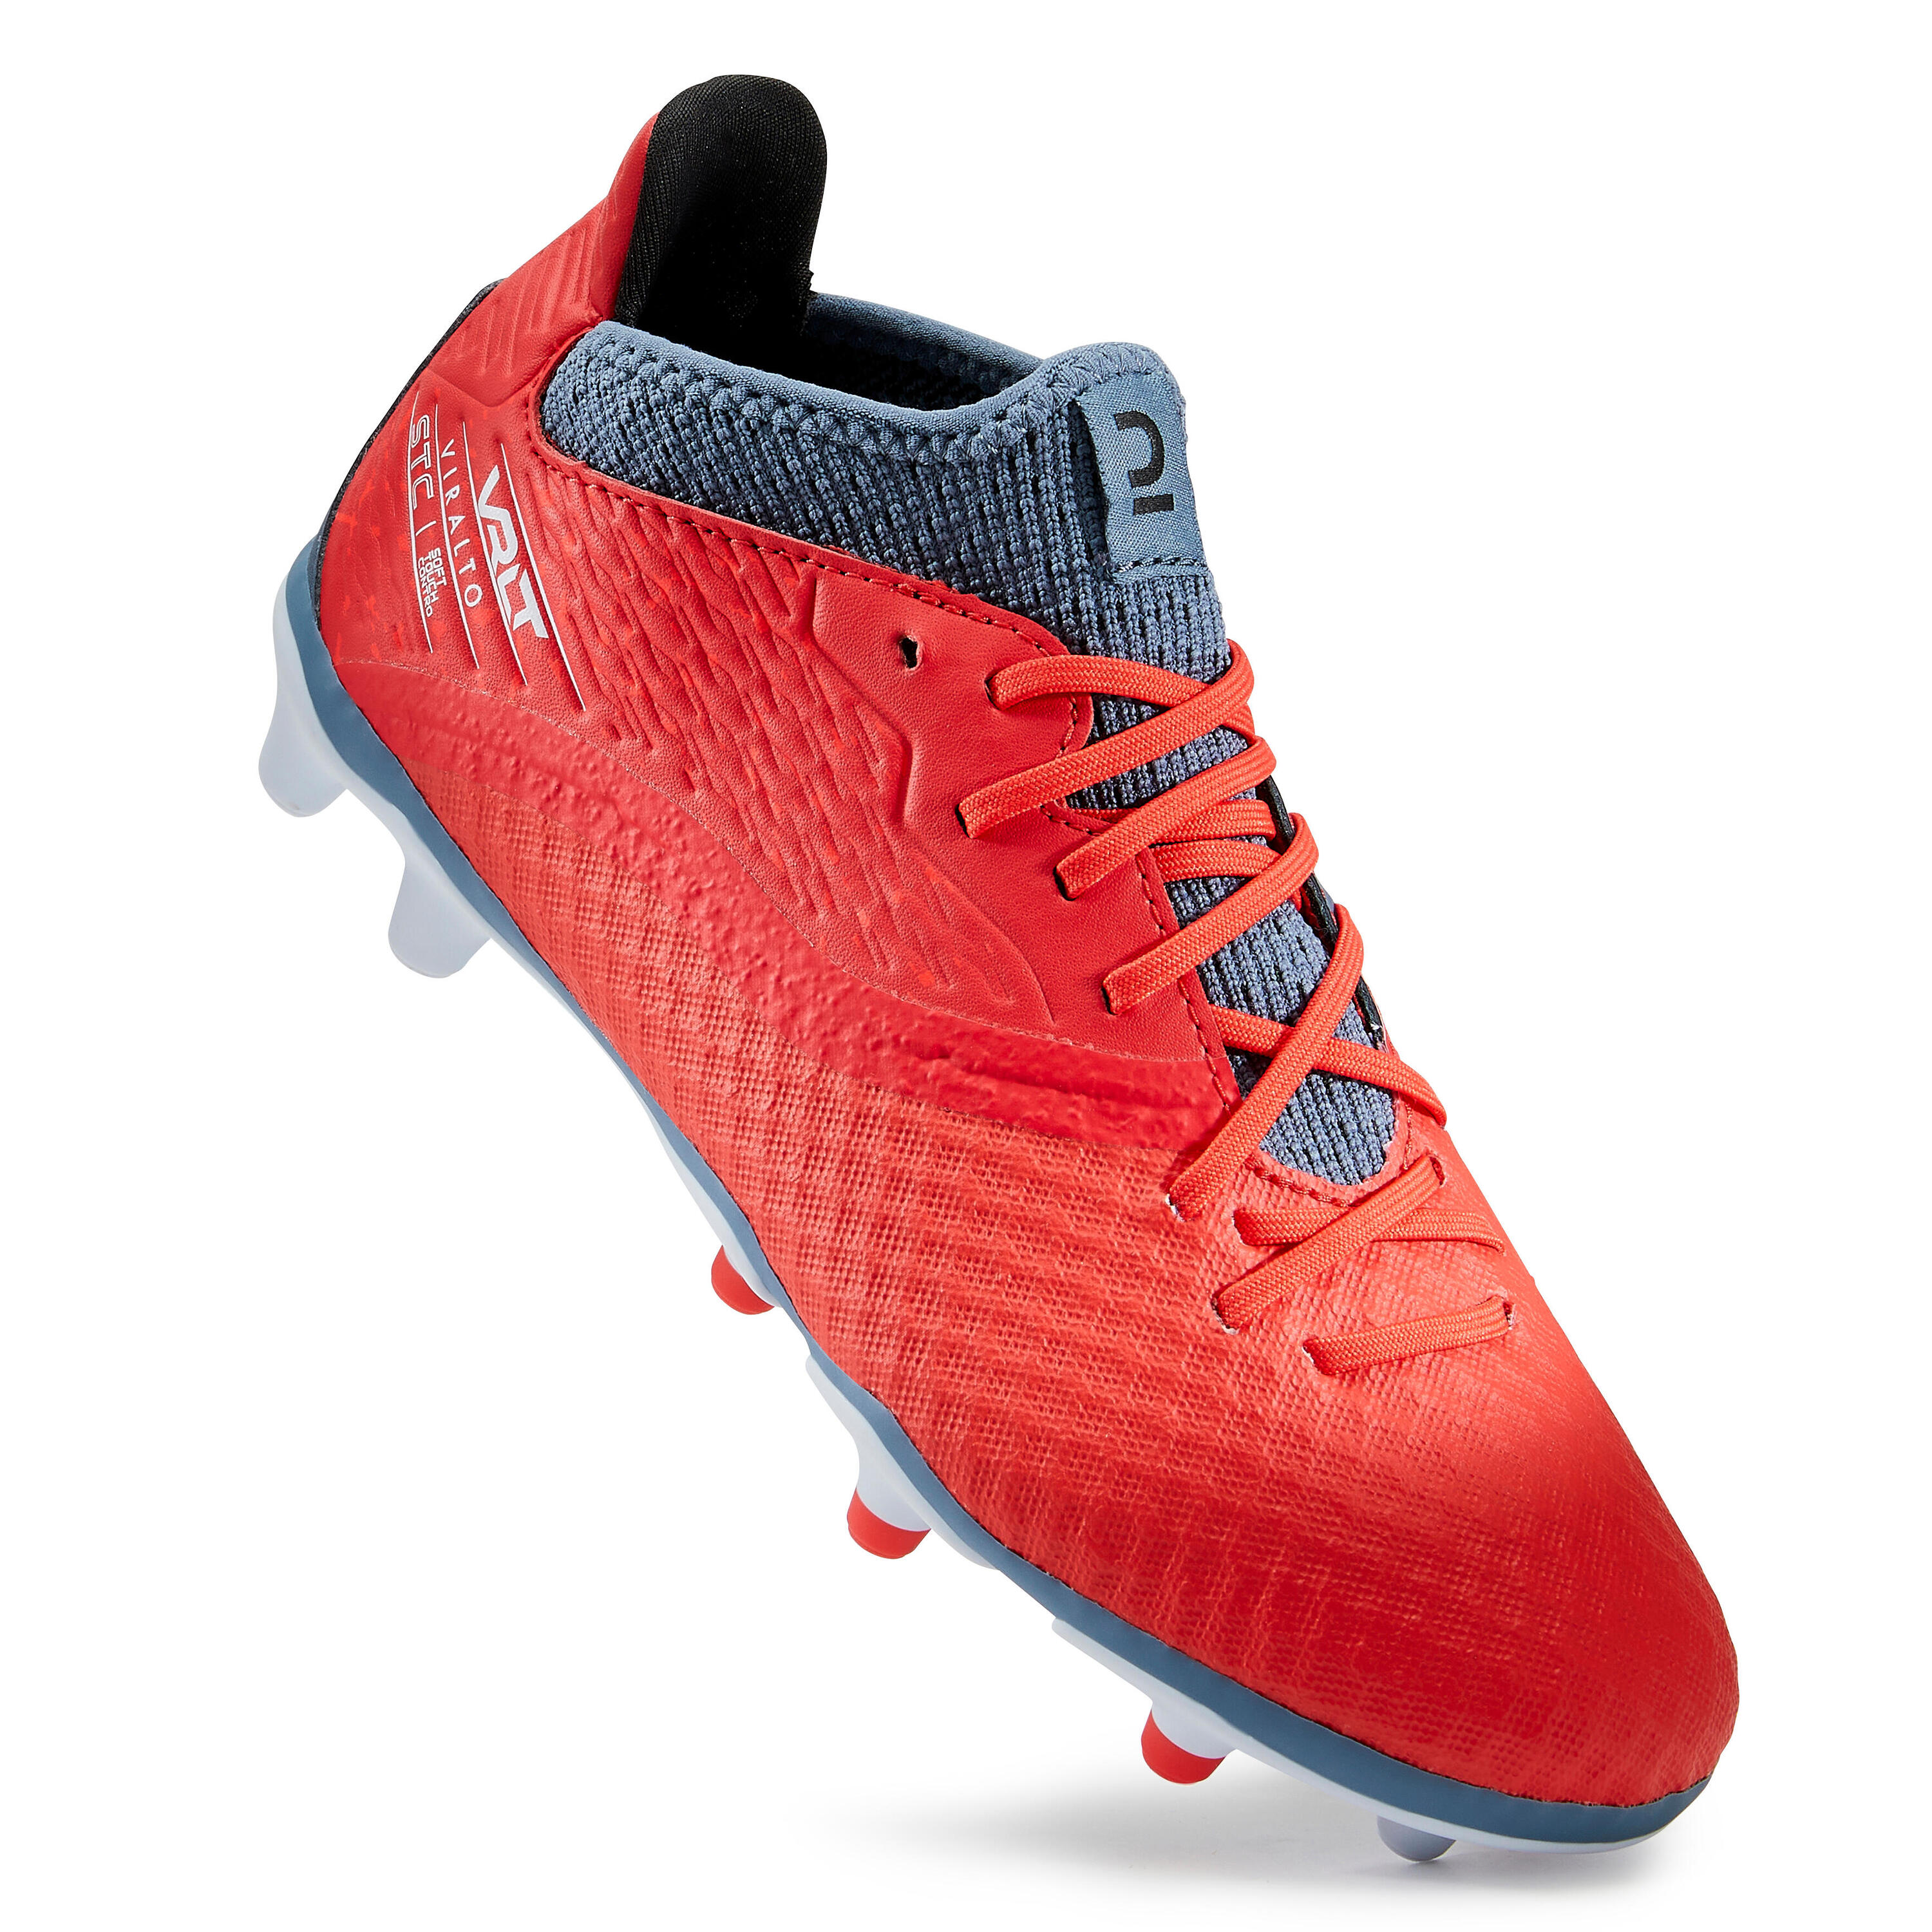 Kids' Lace-Up Football Boots Viralto III FG - Red/Grey 4/11